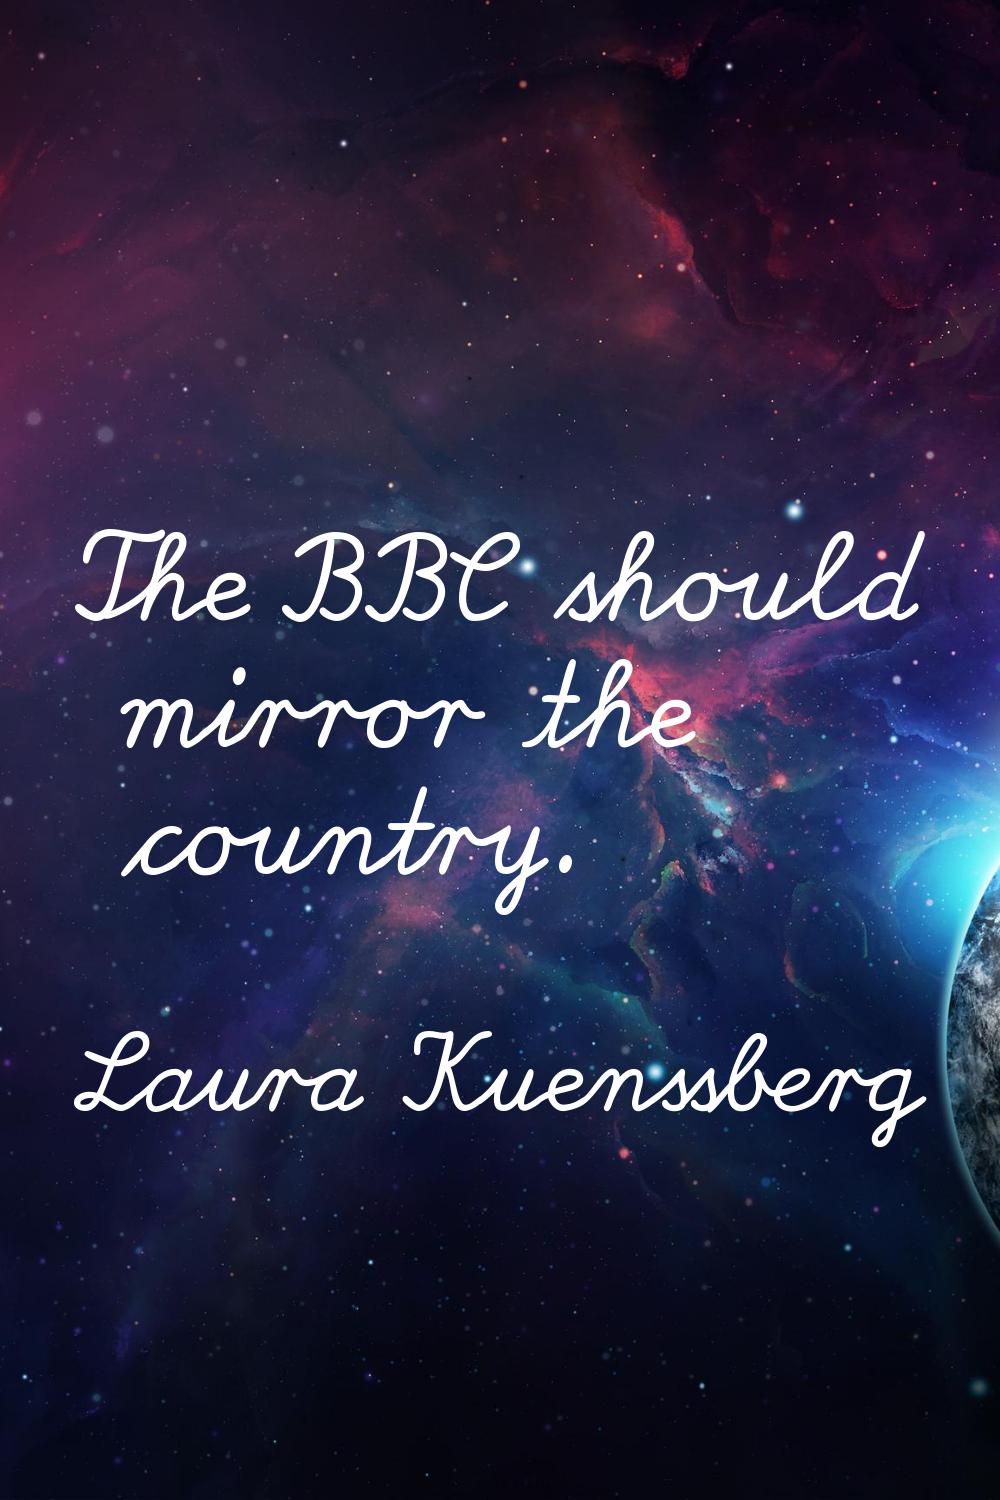 The BBC should mirror the country.